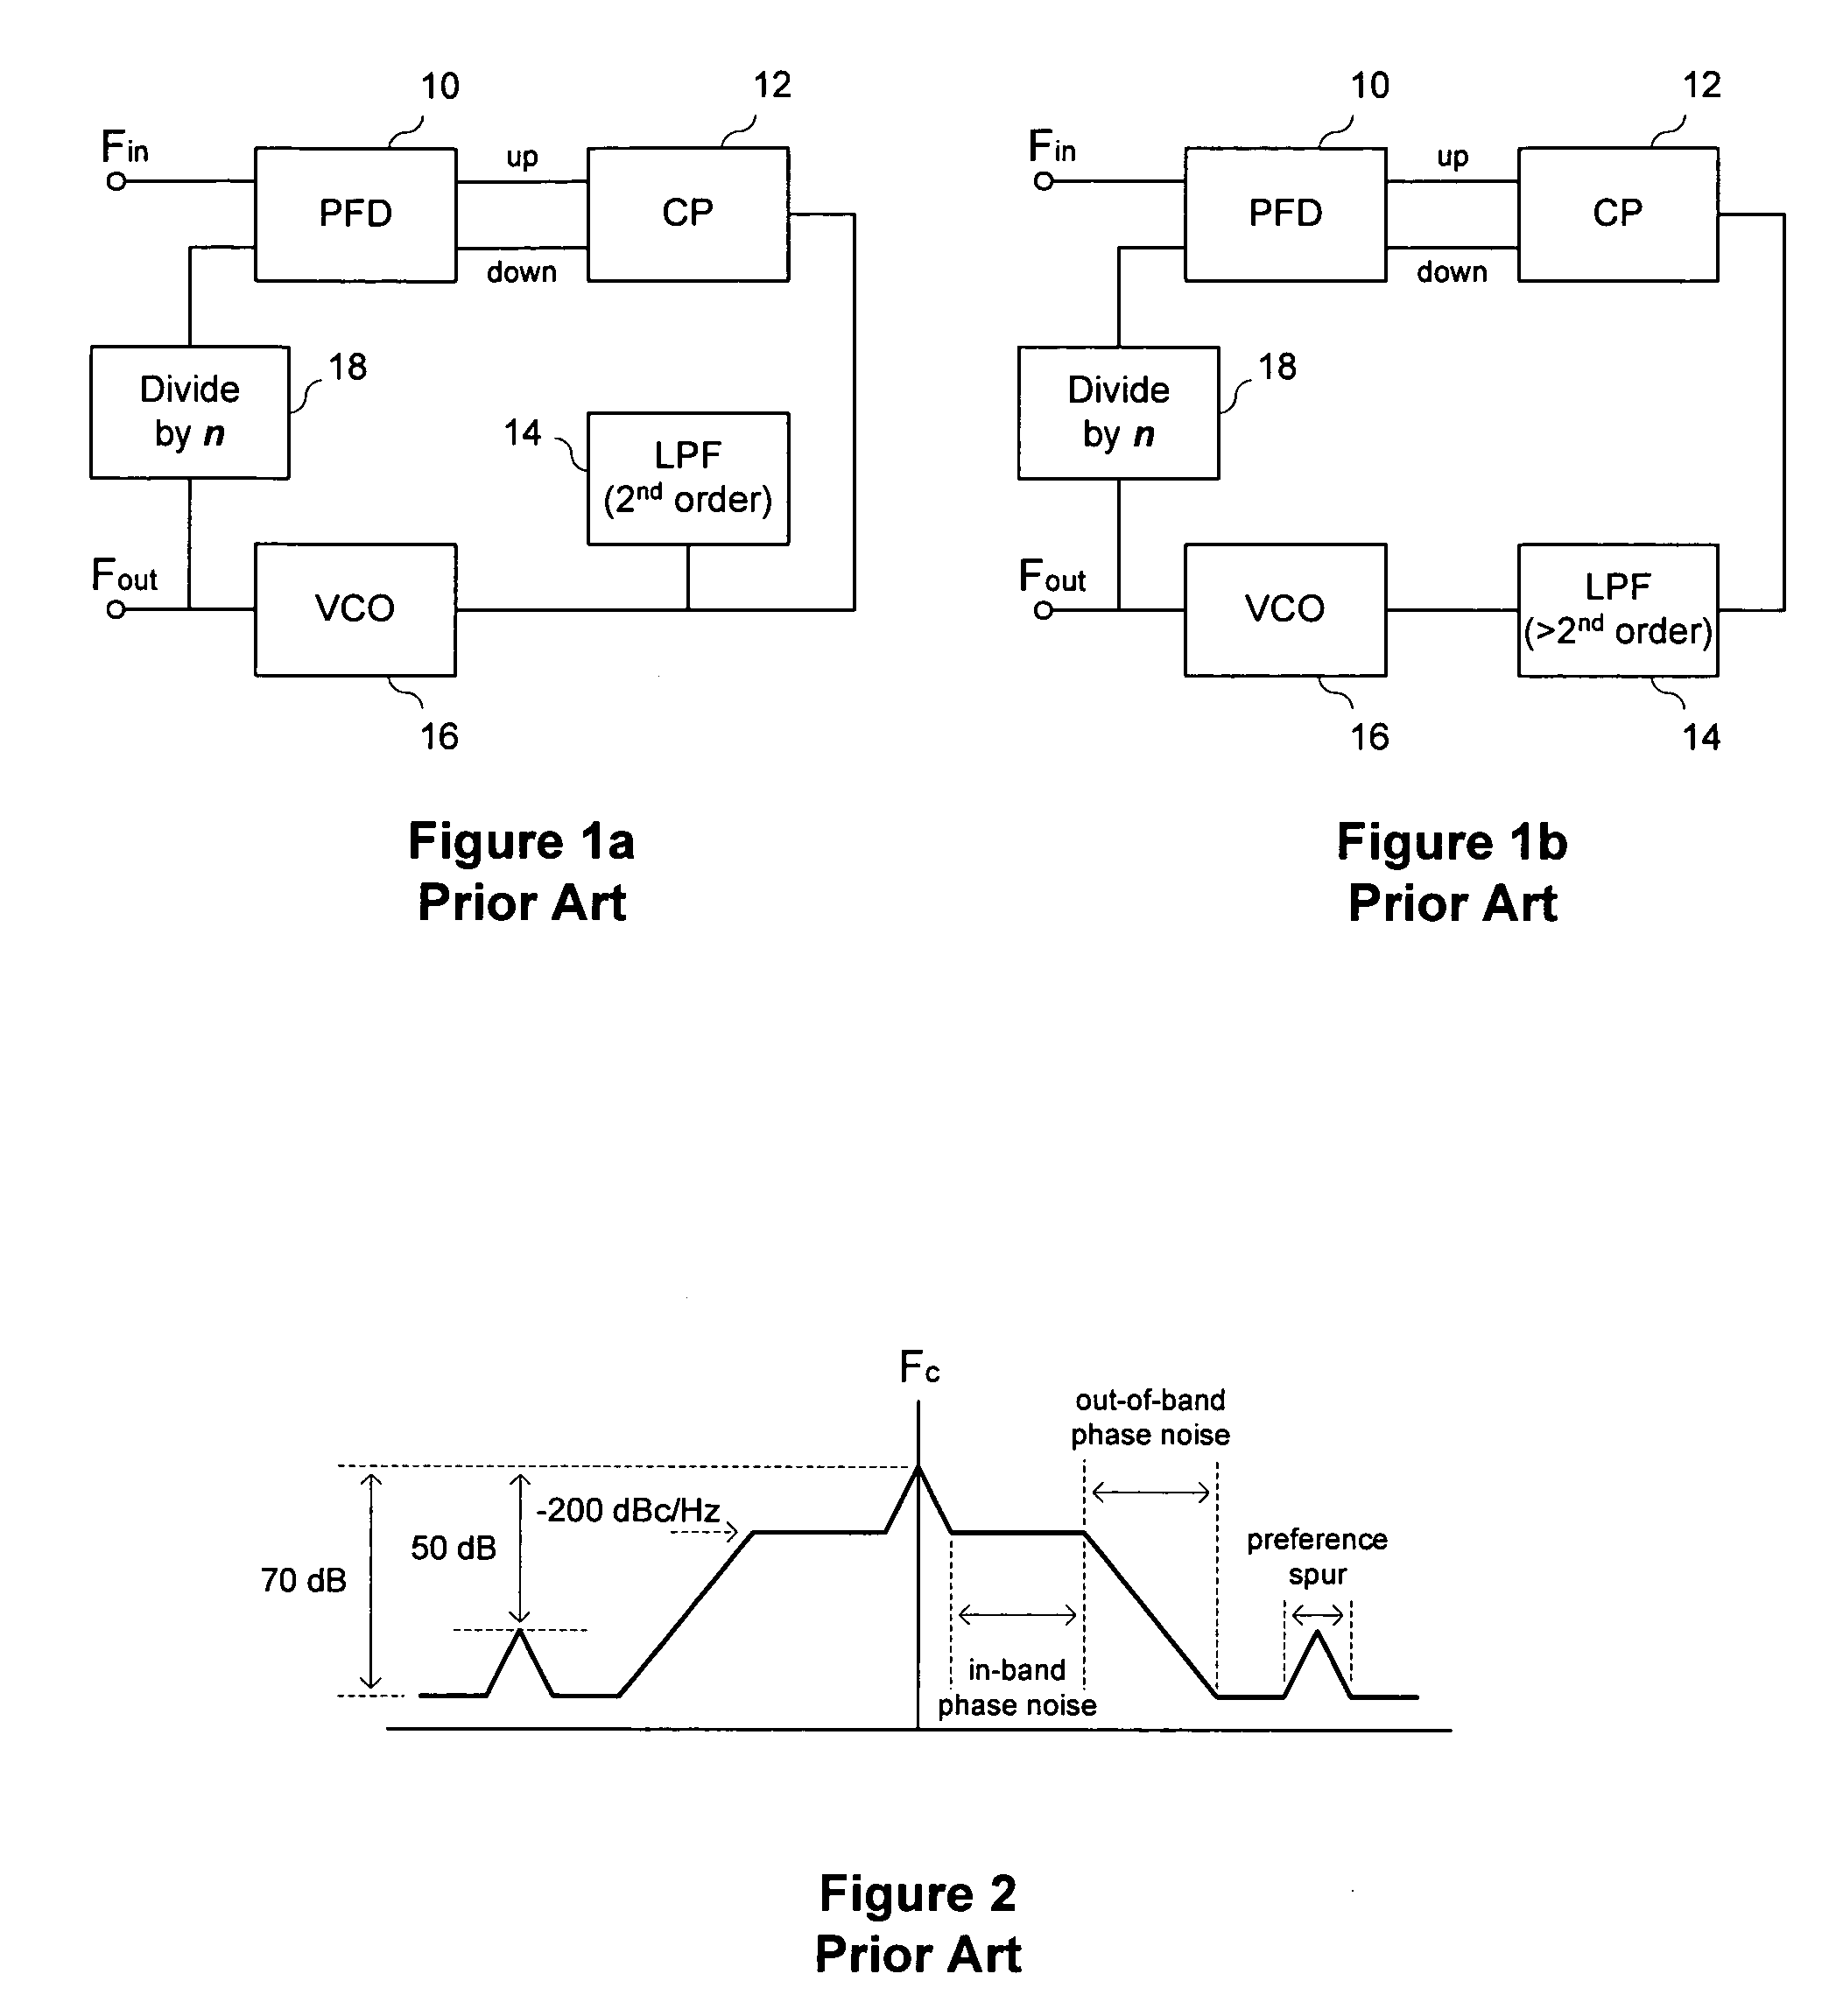 Charge pump circuit using active feedback controlled current sources